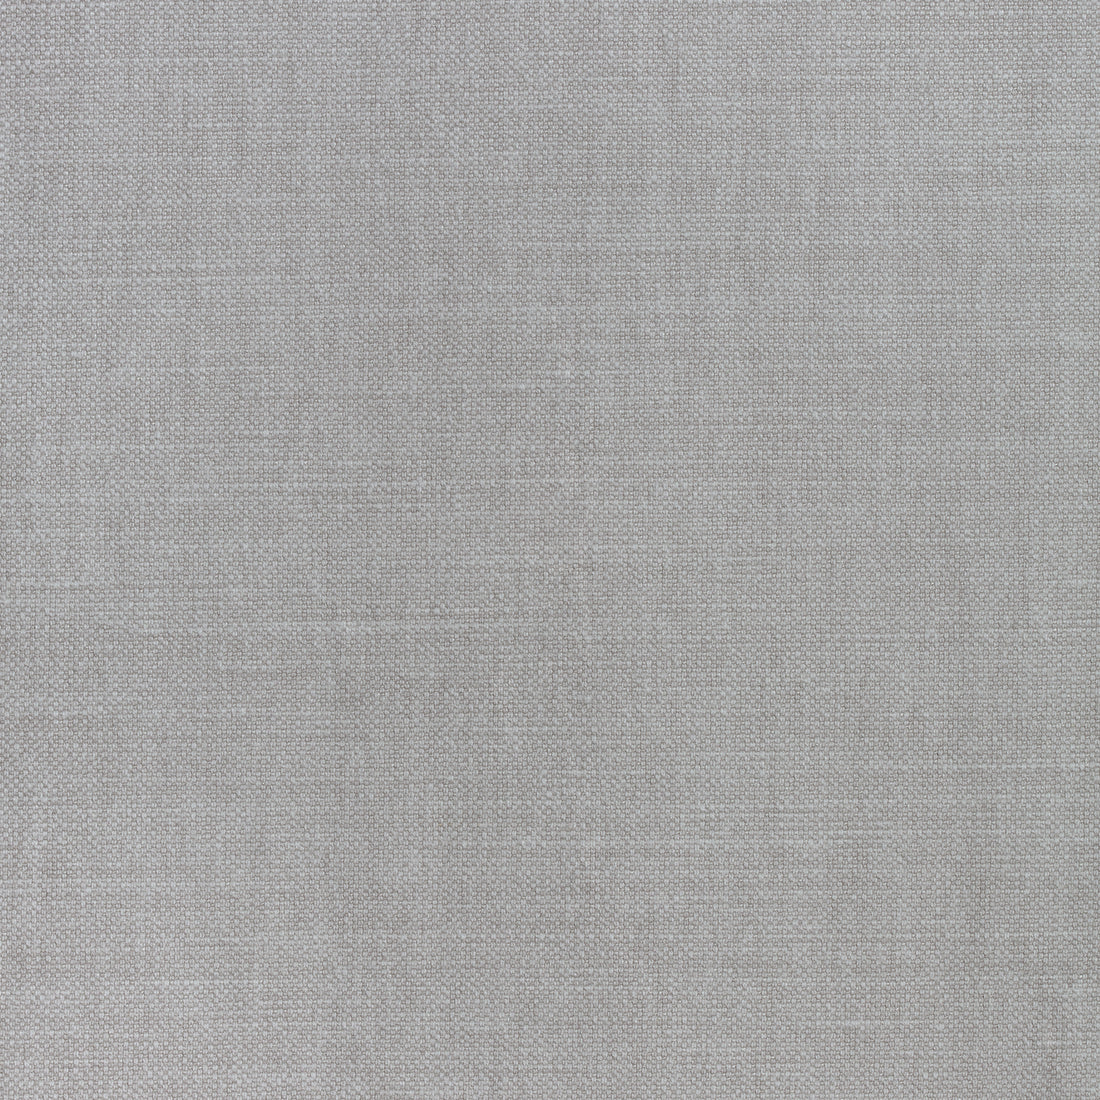 Prisma fabric in nickel color - pattern number W70119 - by Thibaut in the Woven Resource Vol 12 Prisma Fabrics collection